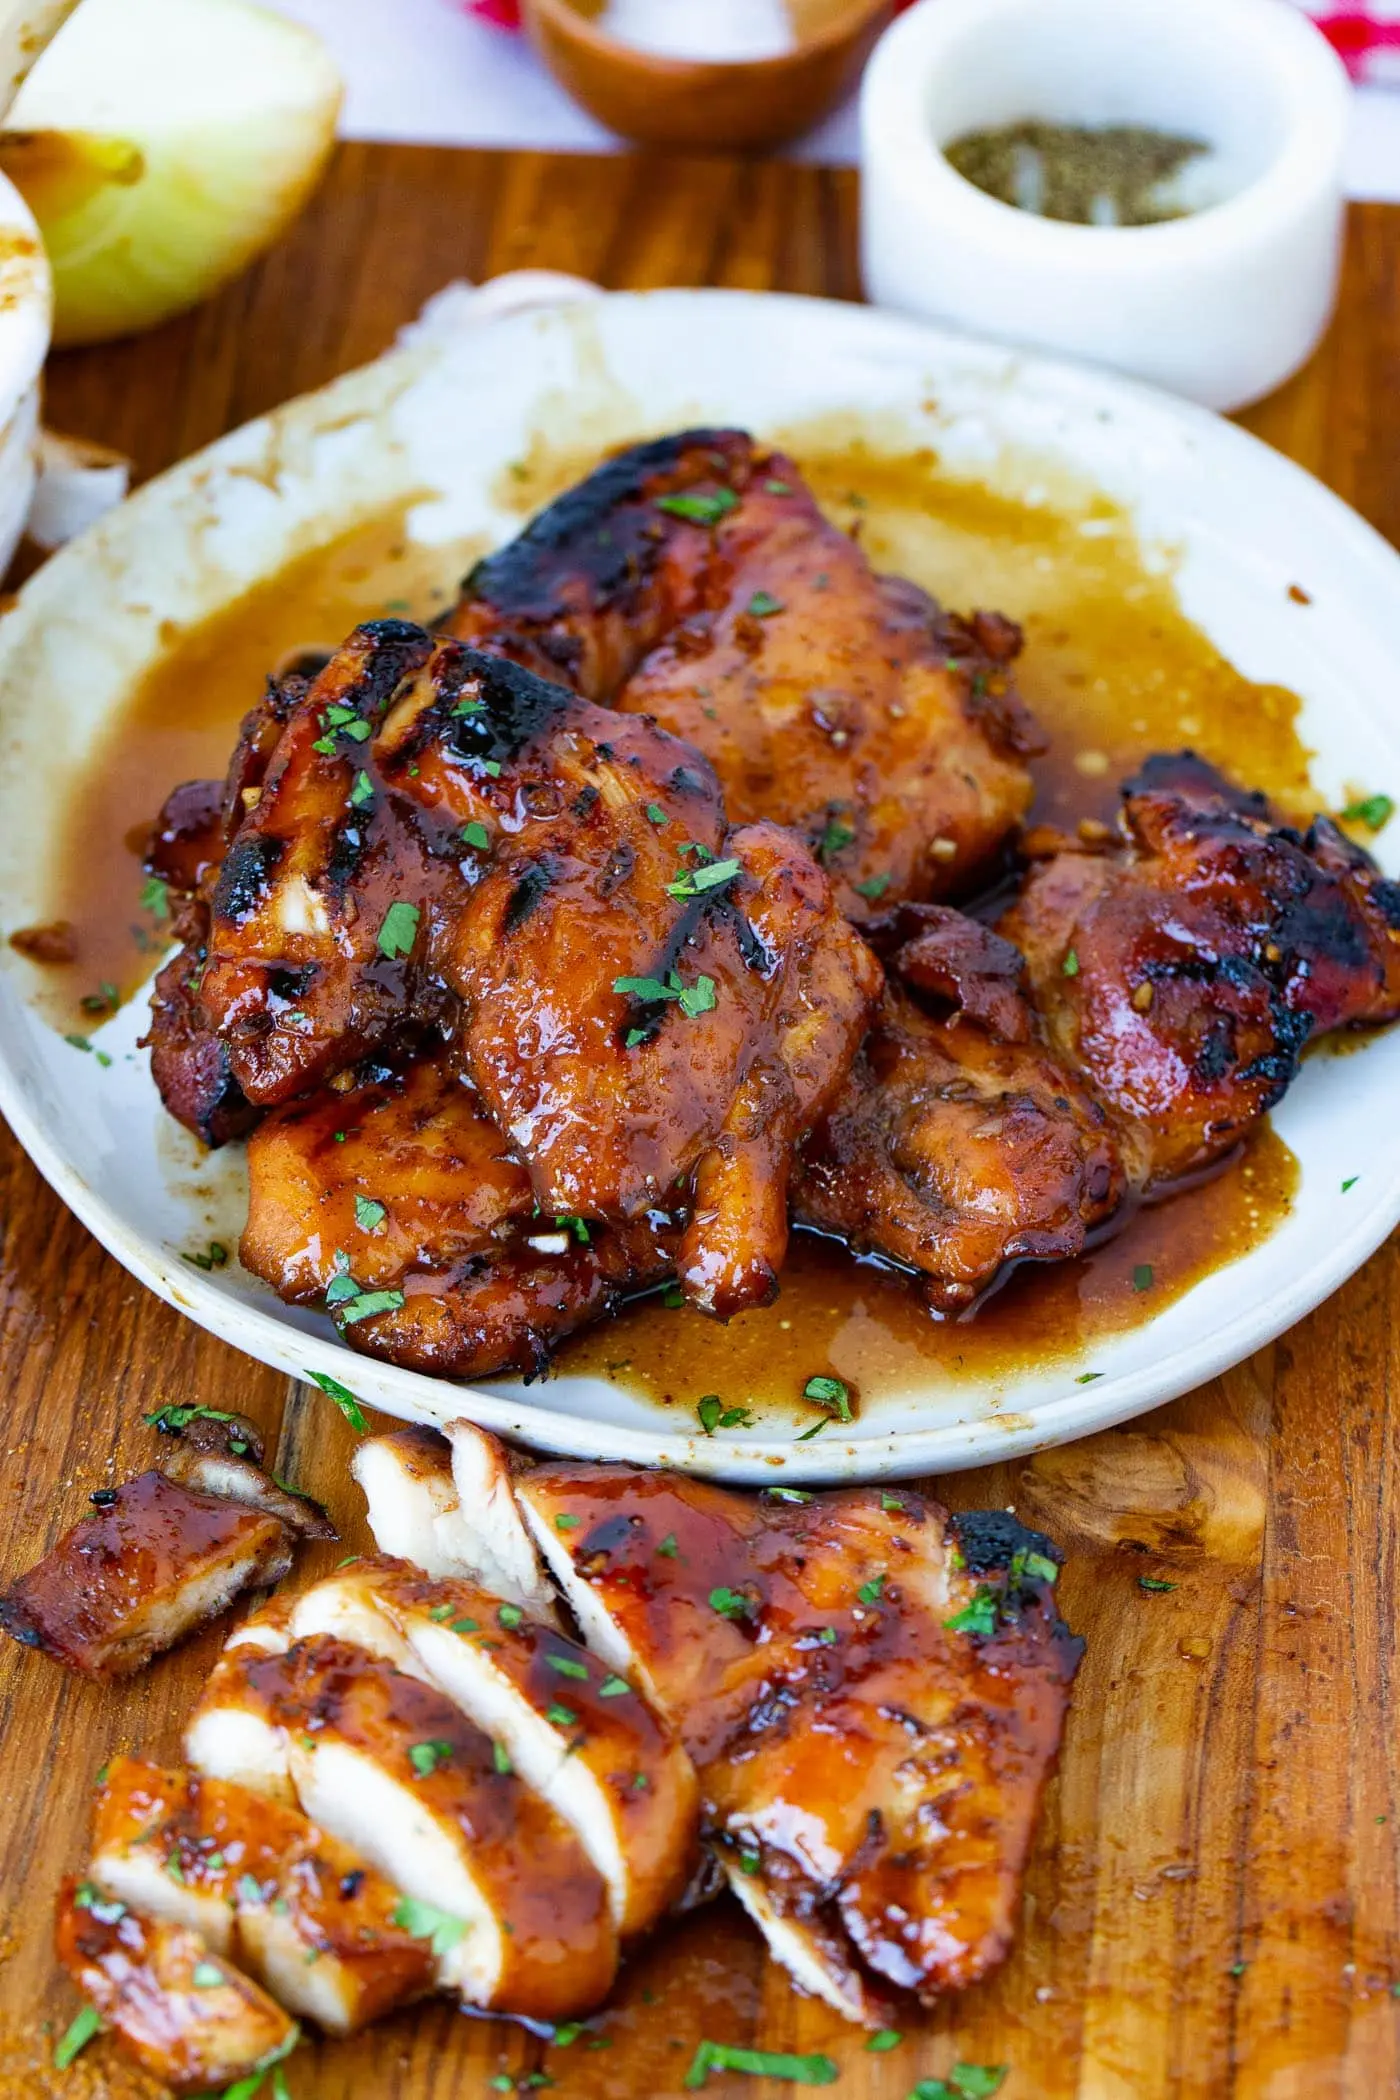 smoked bbq chicken marinade - How long can chicken marinate in BBQ